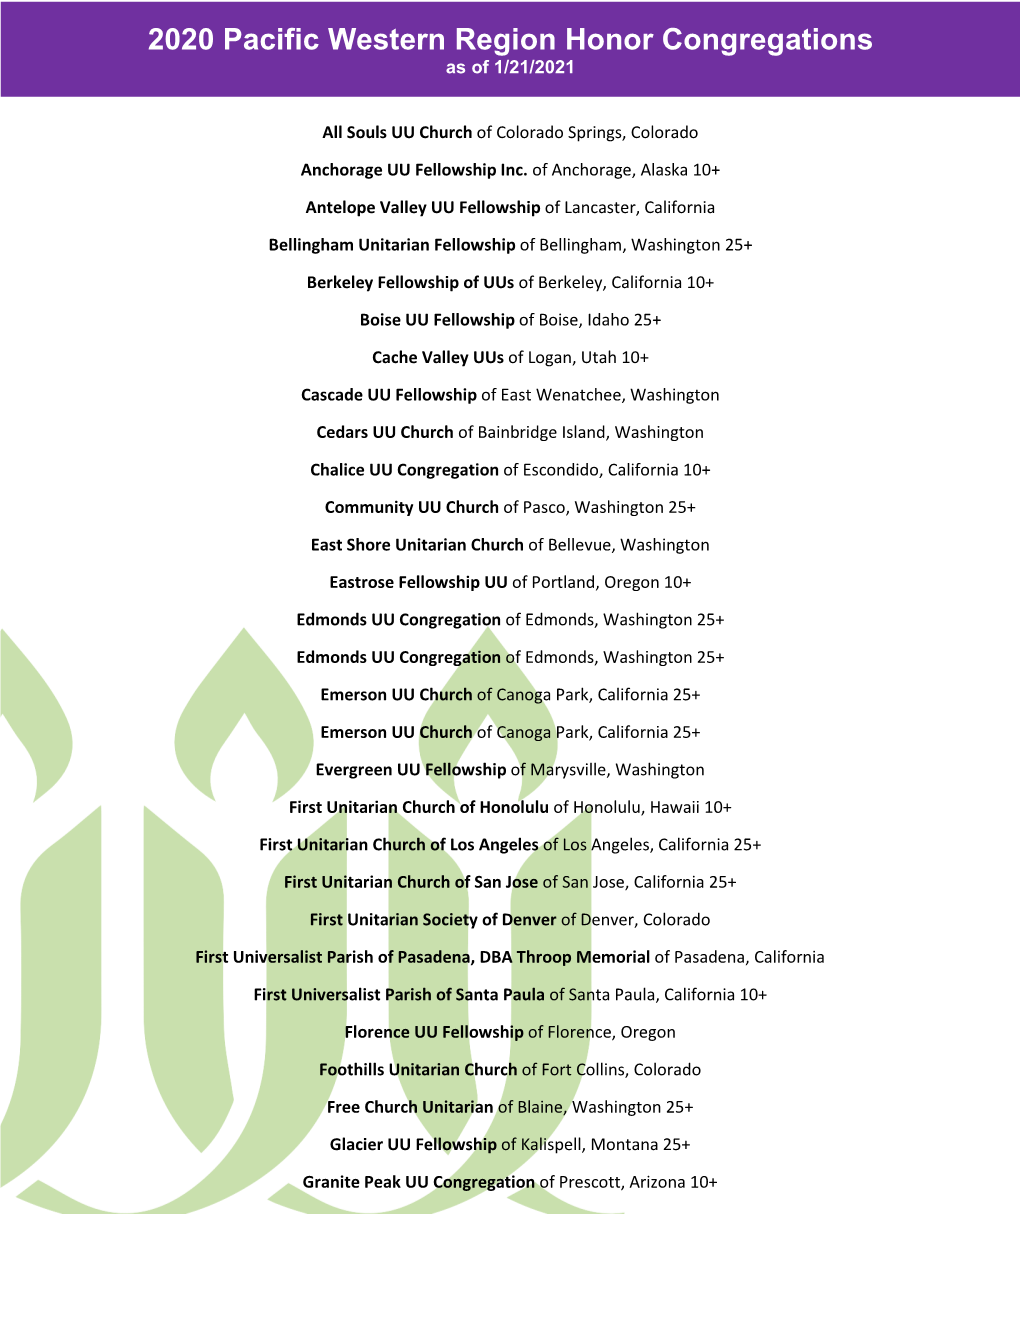 2020 Pacific Western Region Honor Congregations As of 1/21/2021